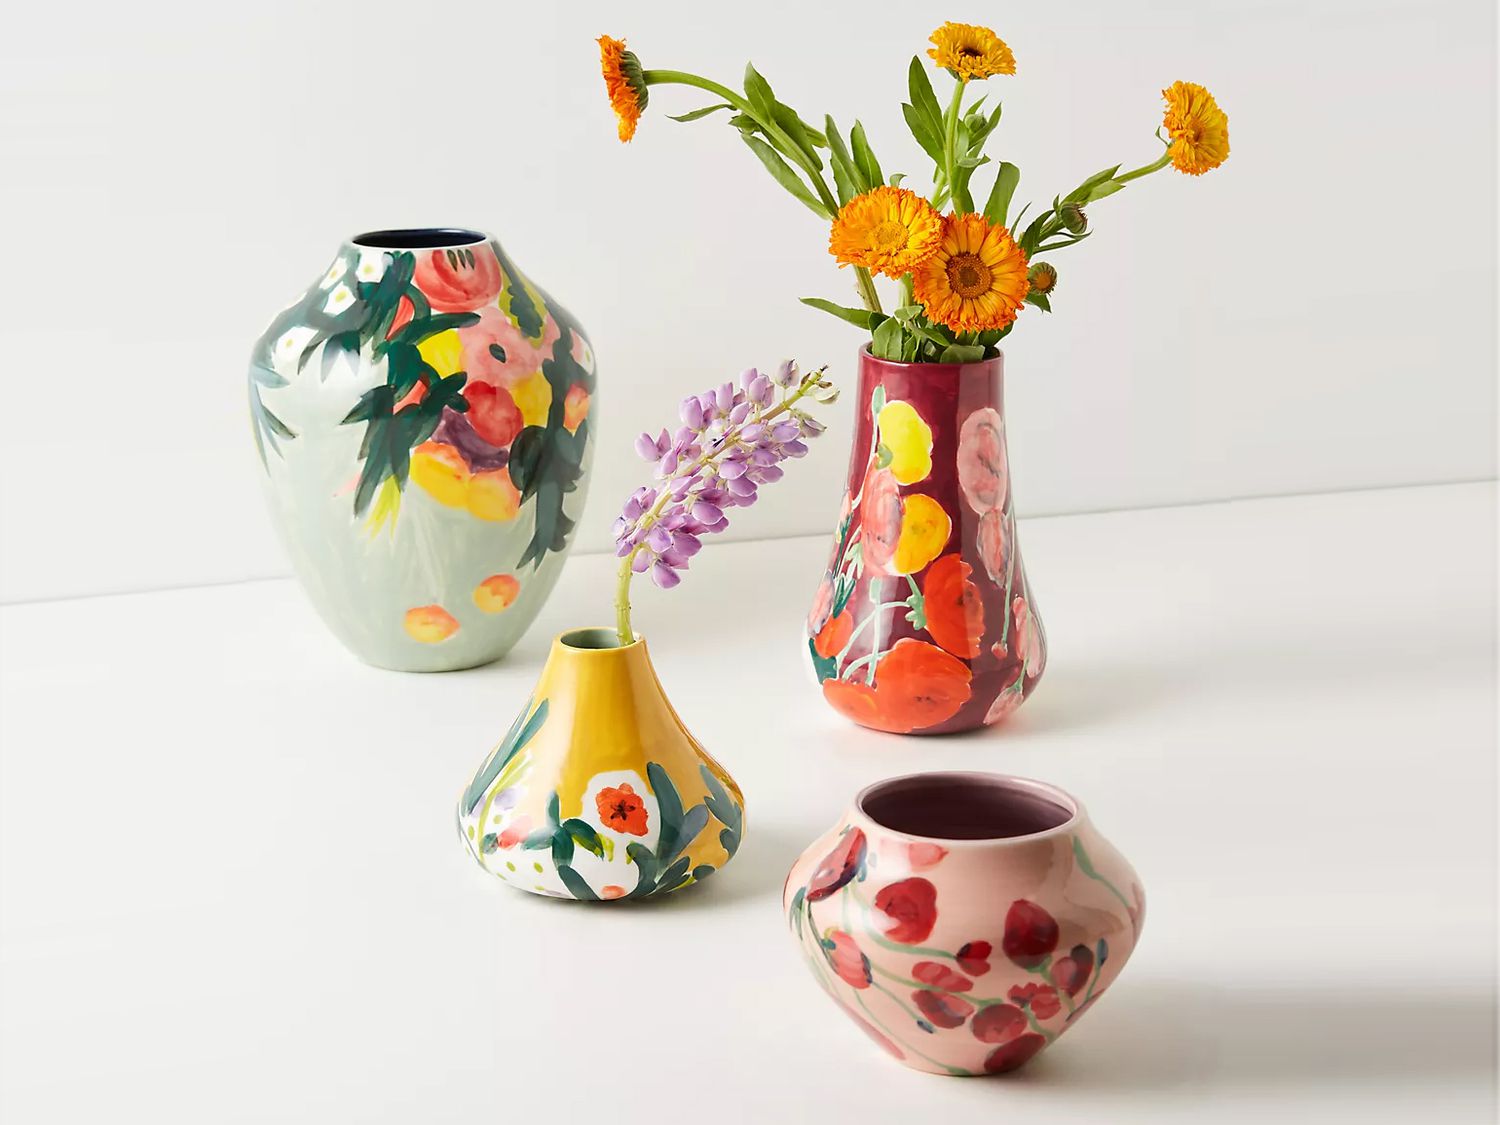 Great Gifts for the Home, Colorful Floral Vases